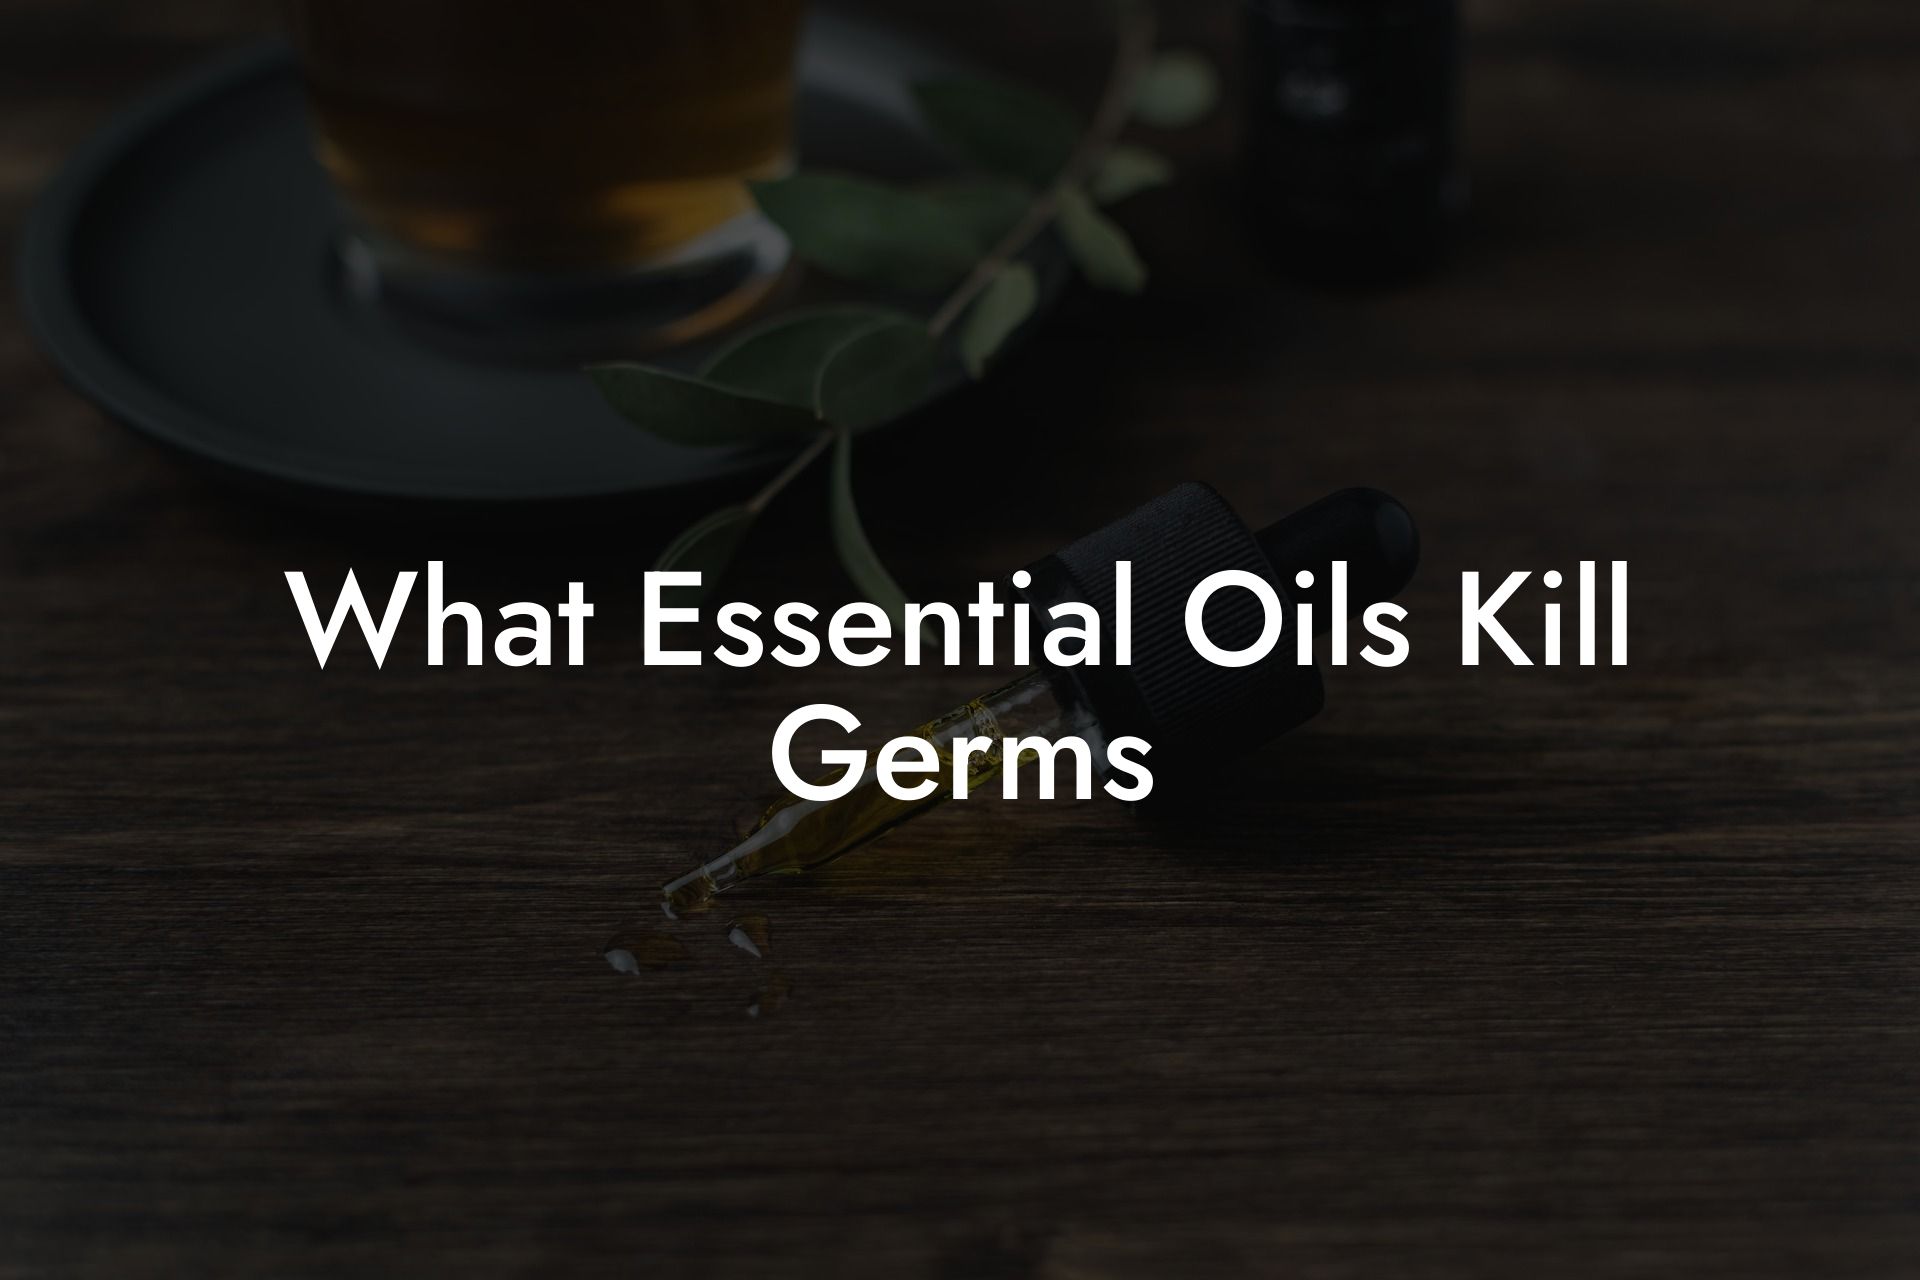 What Essential Oils Kill Germs